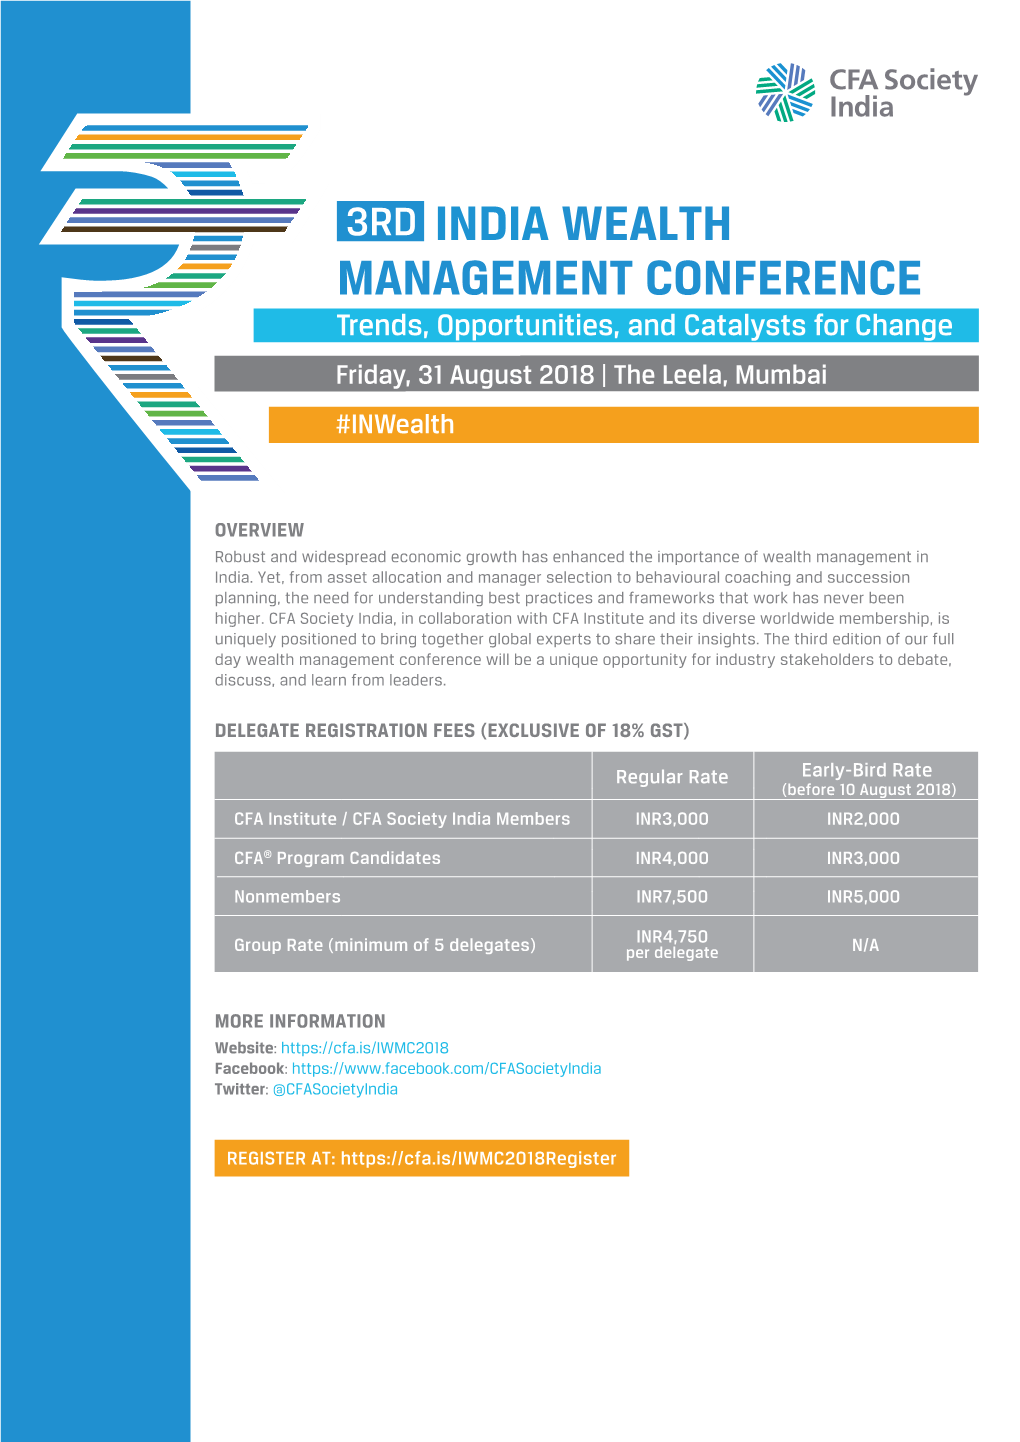 INDIA WEALTH MANAGEMENT CONFERENCE Trends, Opportunities, and Catalysts for Change Friday, 31 August 2018 | the Leela, Mumbai #Inwealth